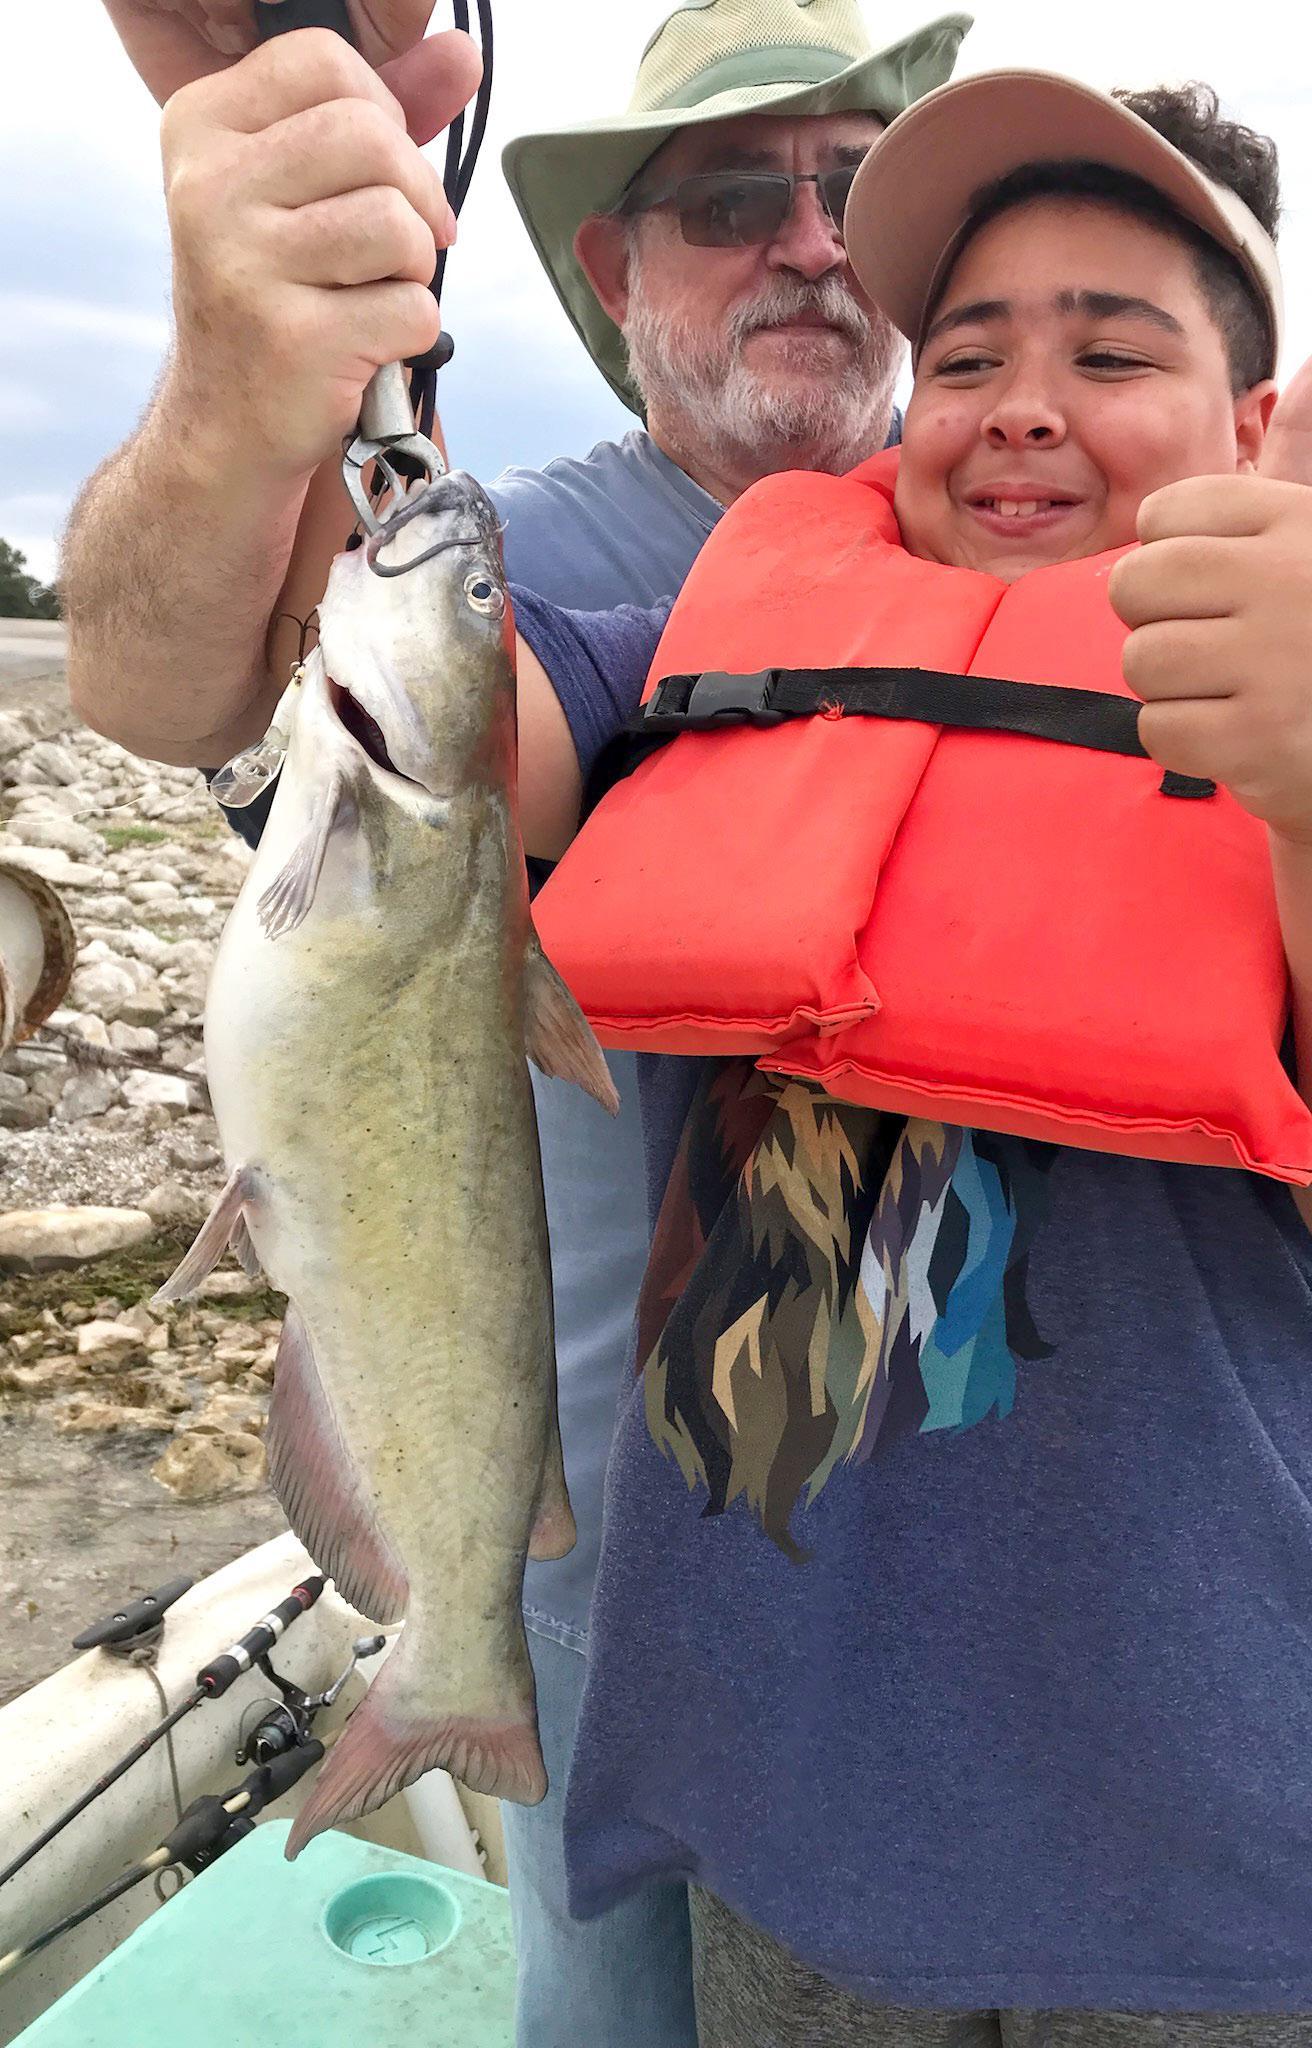 Teaching fishing skills to a new generation in Texas